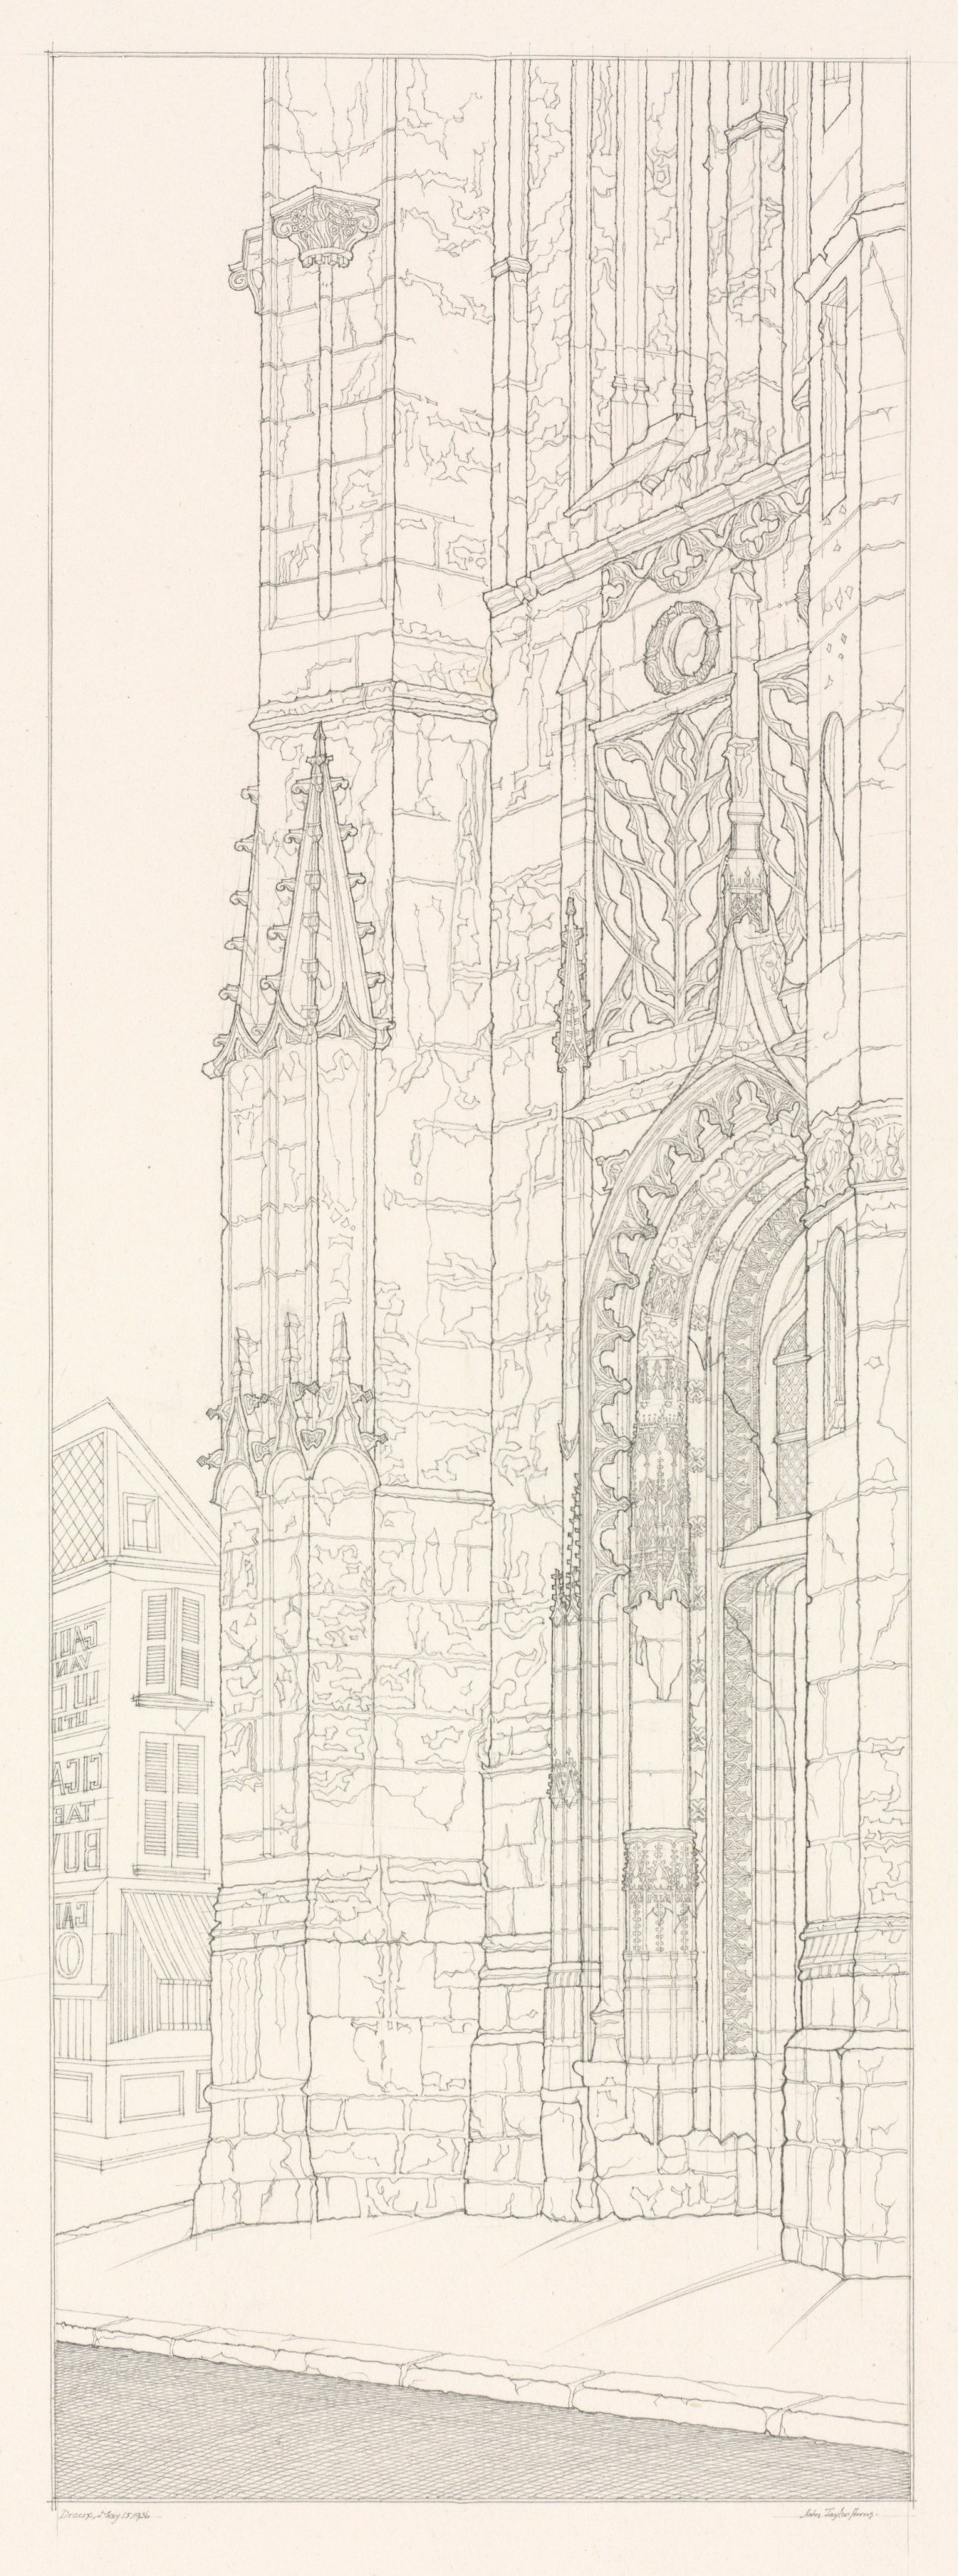 French Church Series No. 44: Dreux